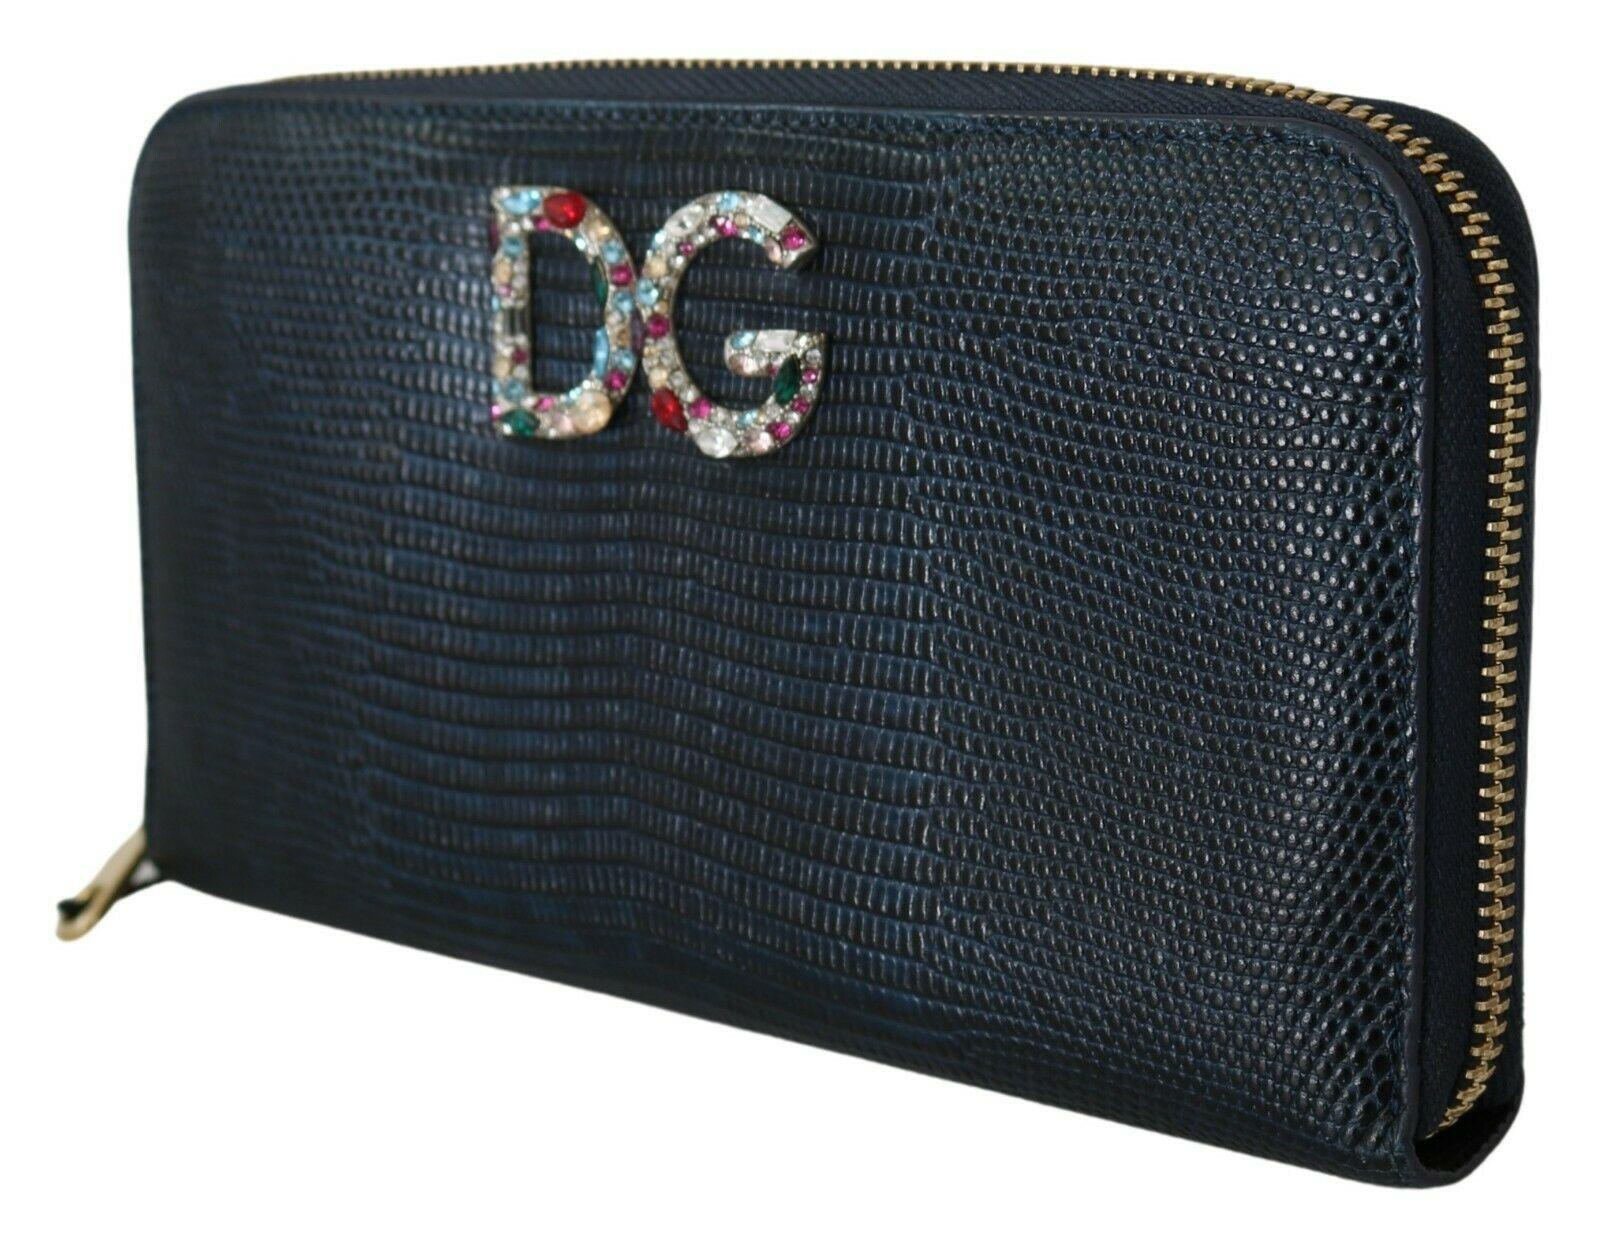 Gorgeous brand new with tags, 100% Authentic Dolce & Gabbana wallet.



Model: Continental wallet clutch
Material: 100% Leather
Color: Dark blue, gold metal detailing
Cardholder slots and coin pockets with zipper closure
Black leather inner